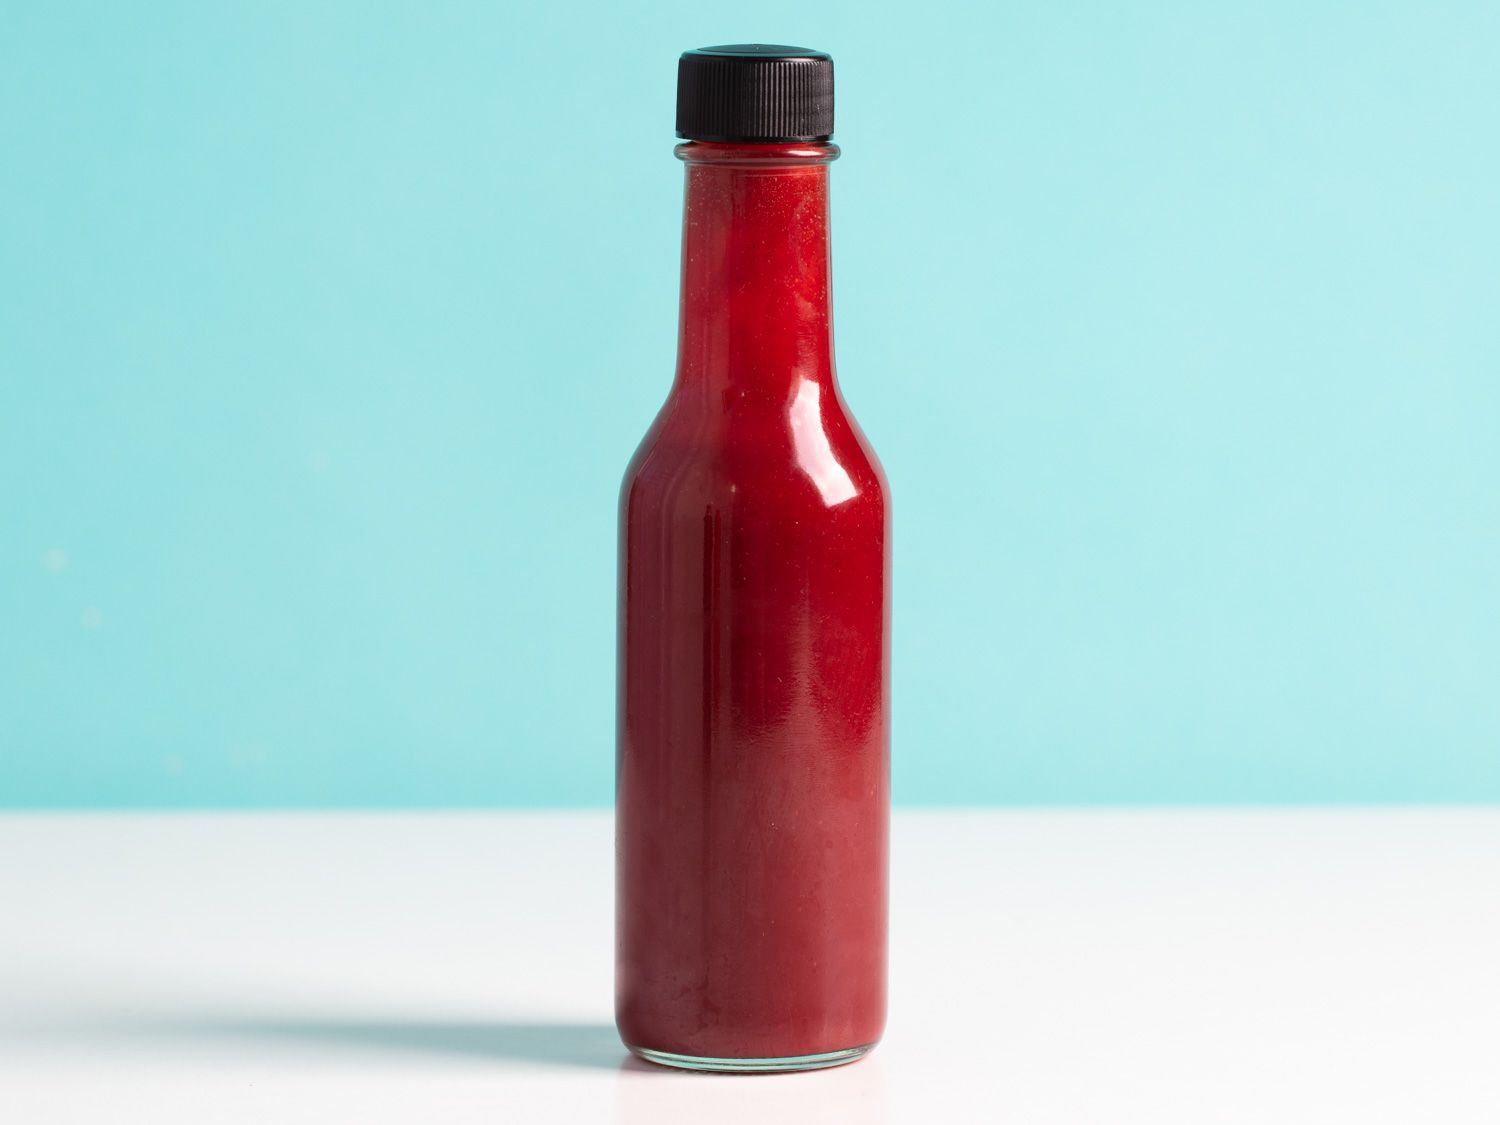 Double berry habanero fermented hot sauce in a bottle